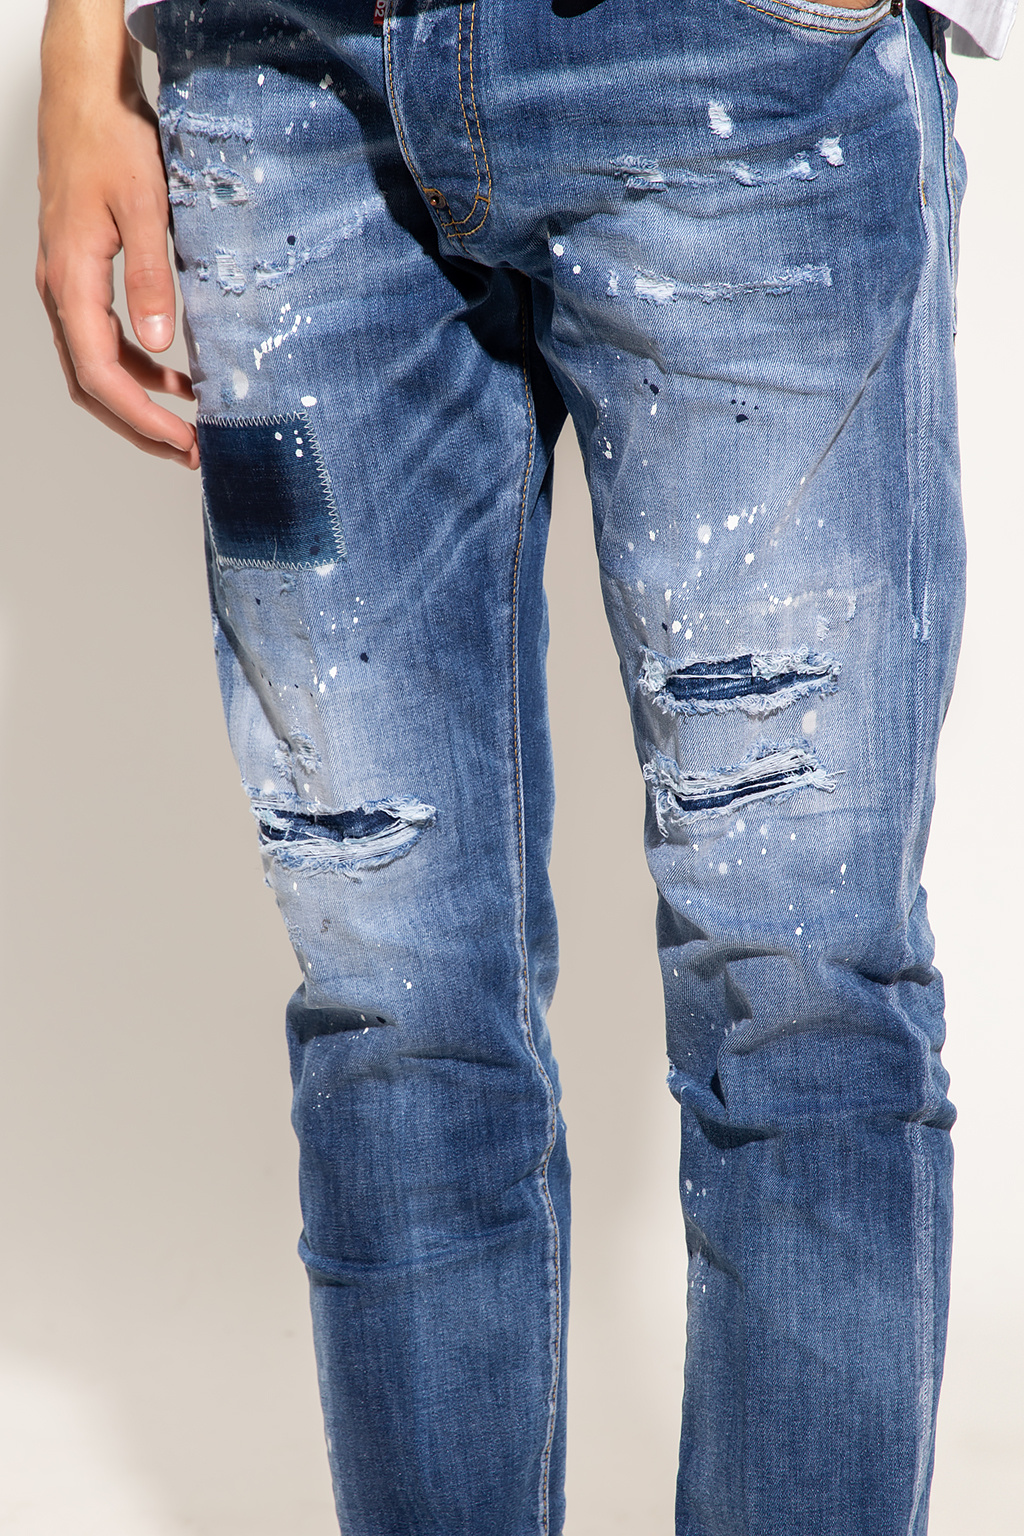 Dsquared2 'Cool Guy Cropped' jeans | Men's Clothing | Vitkac